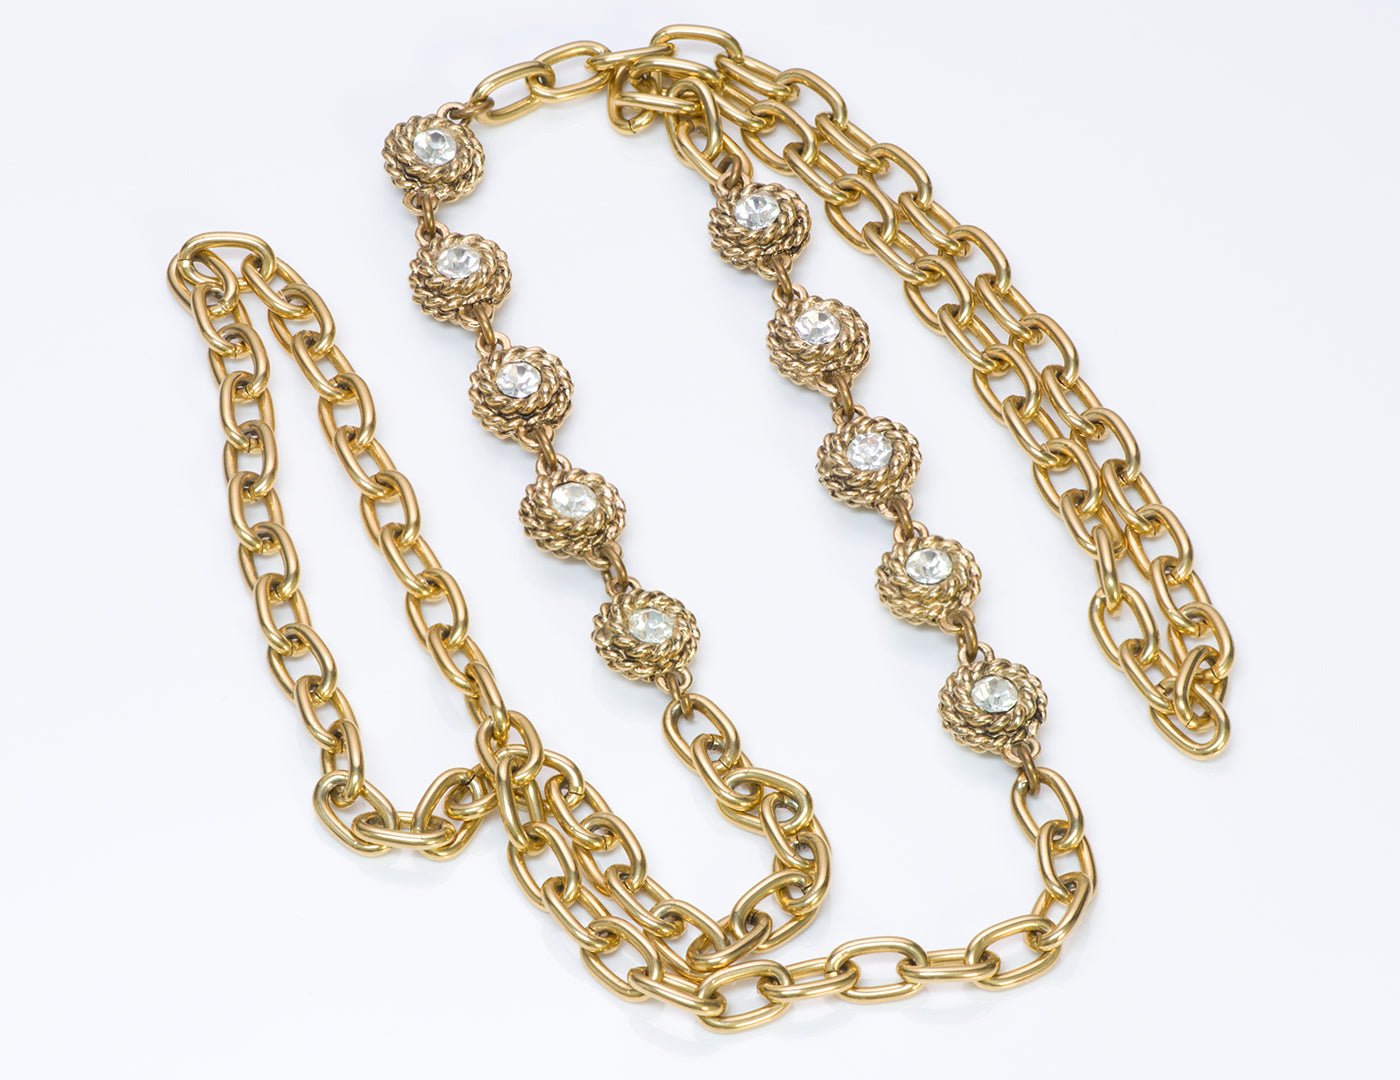 Chanel 1980’s Gold Tone Chain Camellia Crystal Necklace